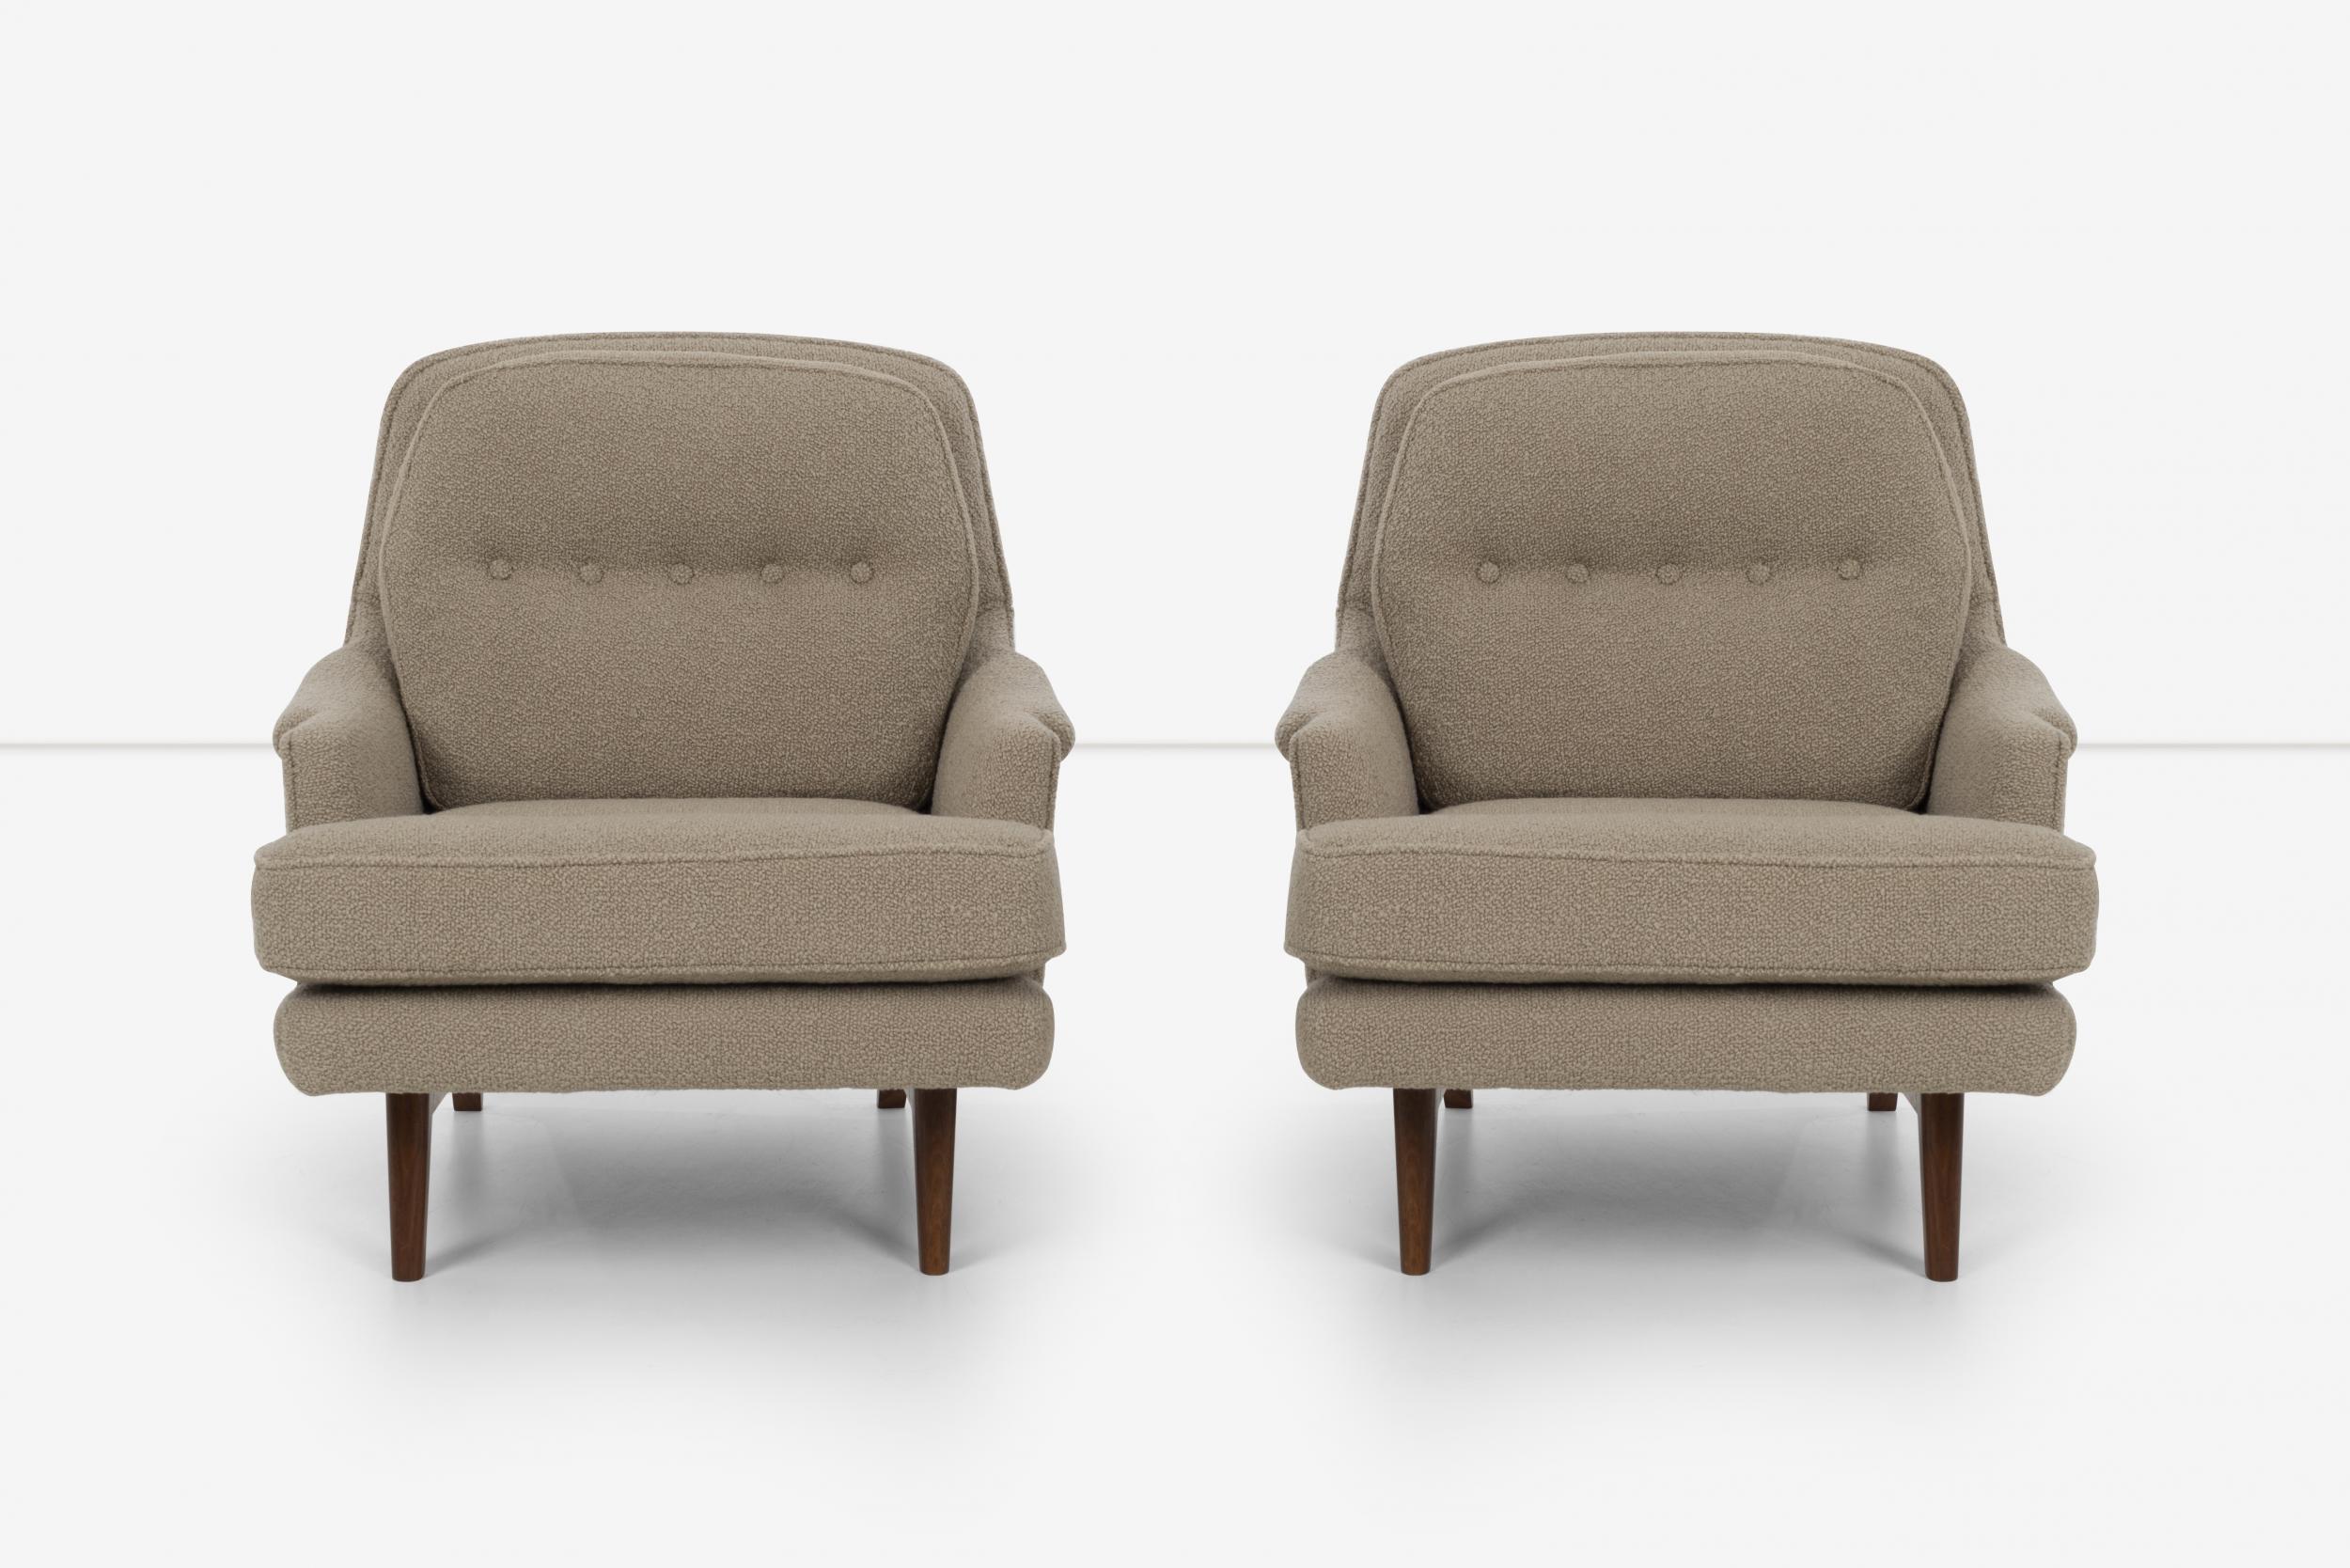 Bouclé Edward Wormley for Dunbar Pair of Lounges Chairs in Knoll Boucle